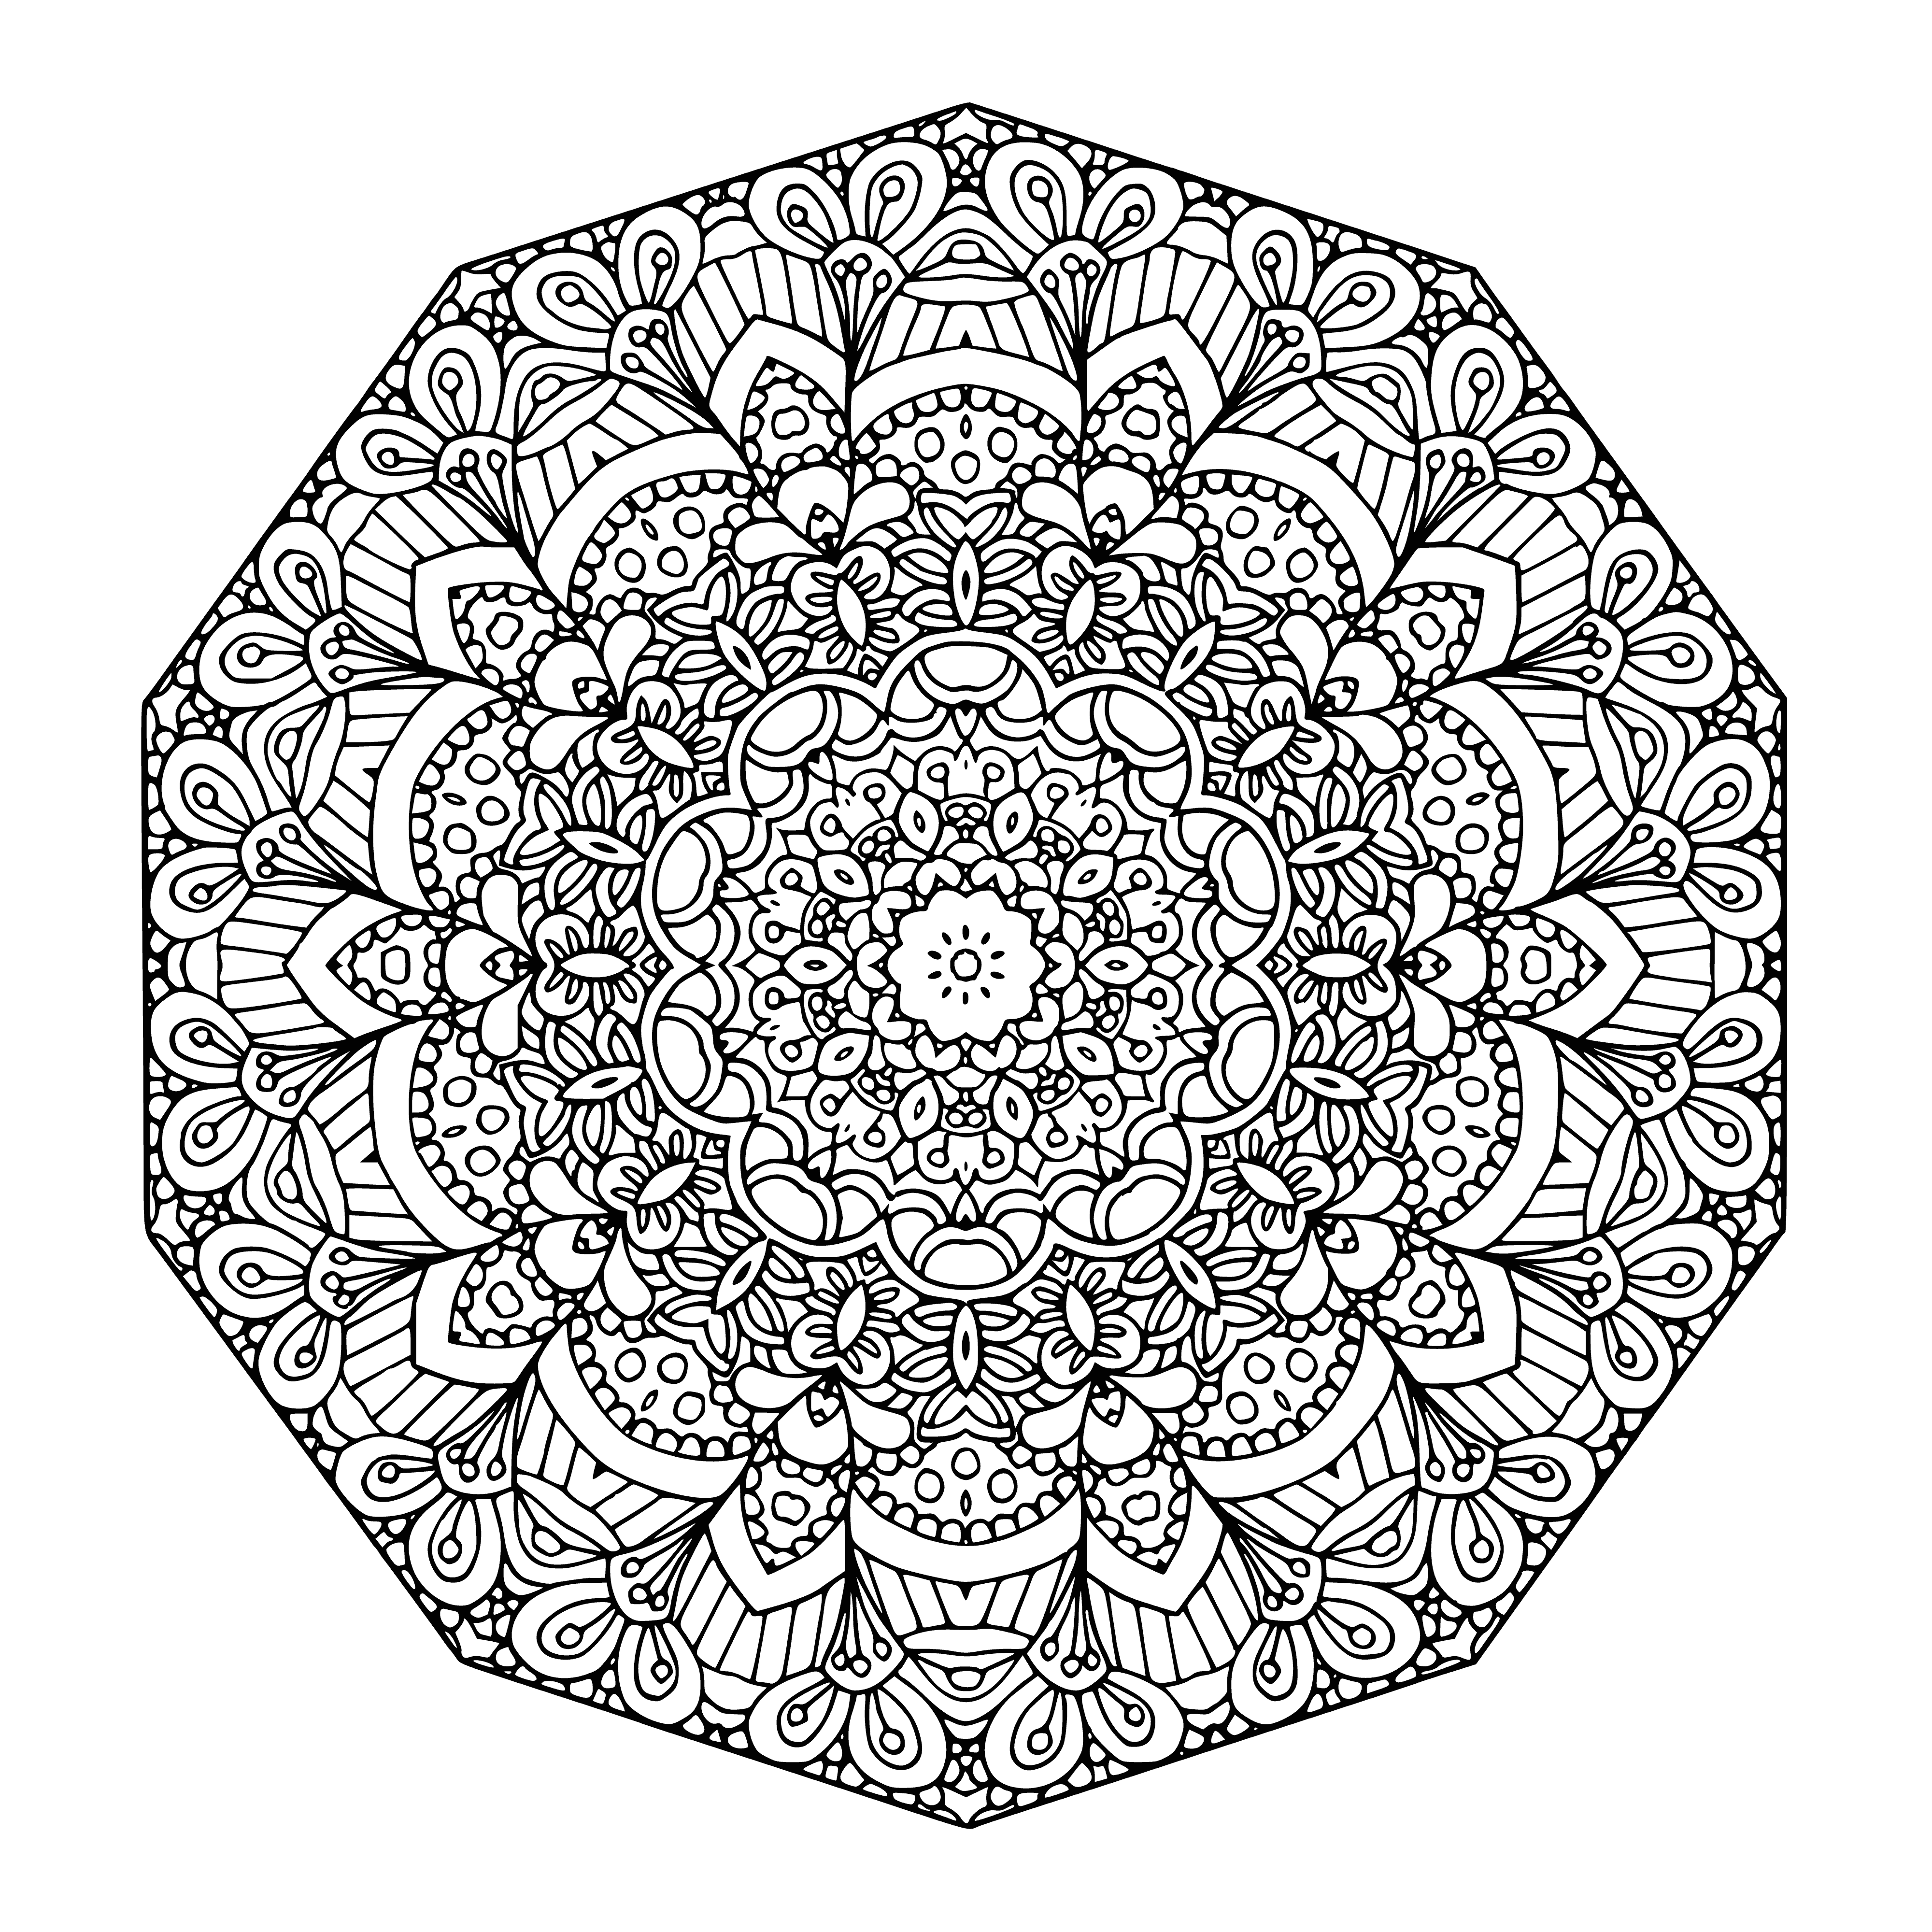 coloring page: Intricate mandala design with many shapes, patterns & detail - a challenging design to color. #mandalas